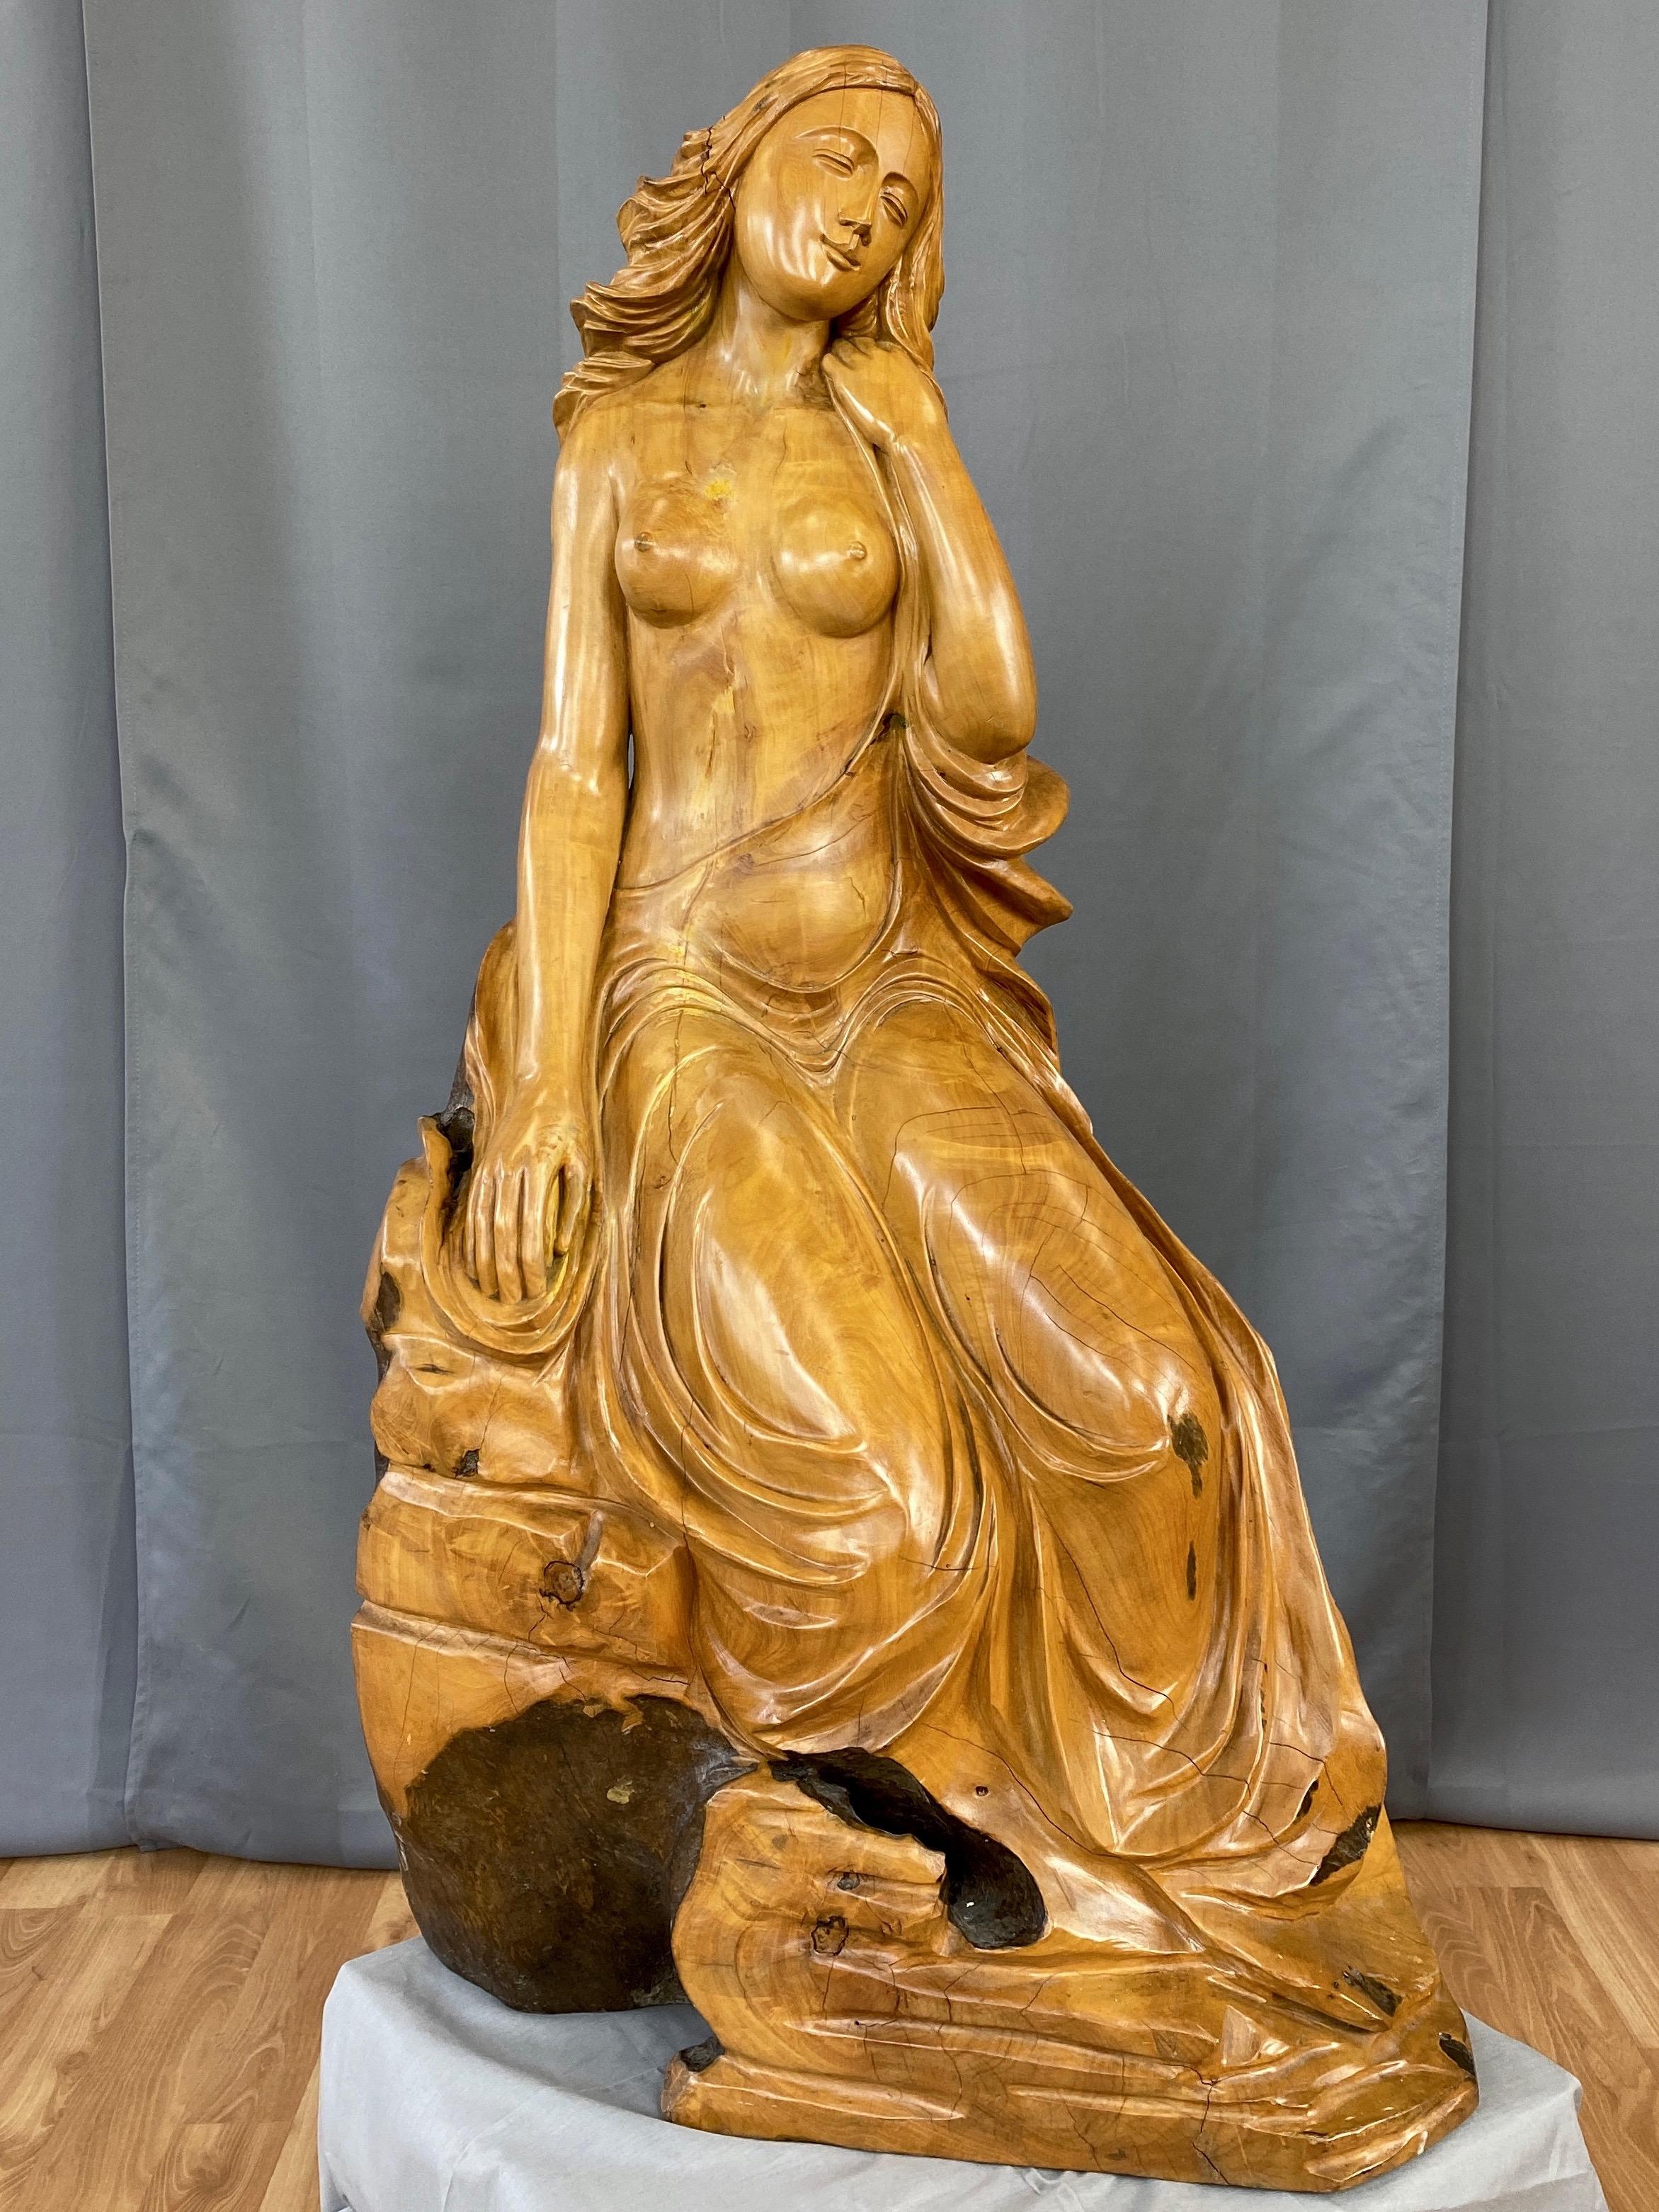 An impressively sized and strikingly beautiful semi-nude female figural sculpture strongly evocative of Sandro Botticelli's 